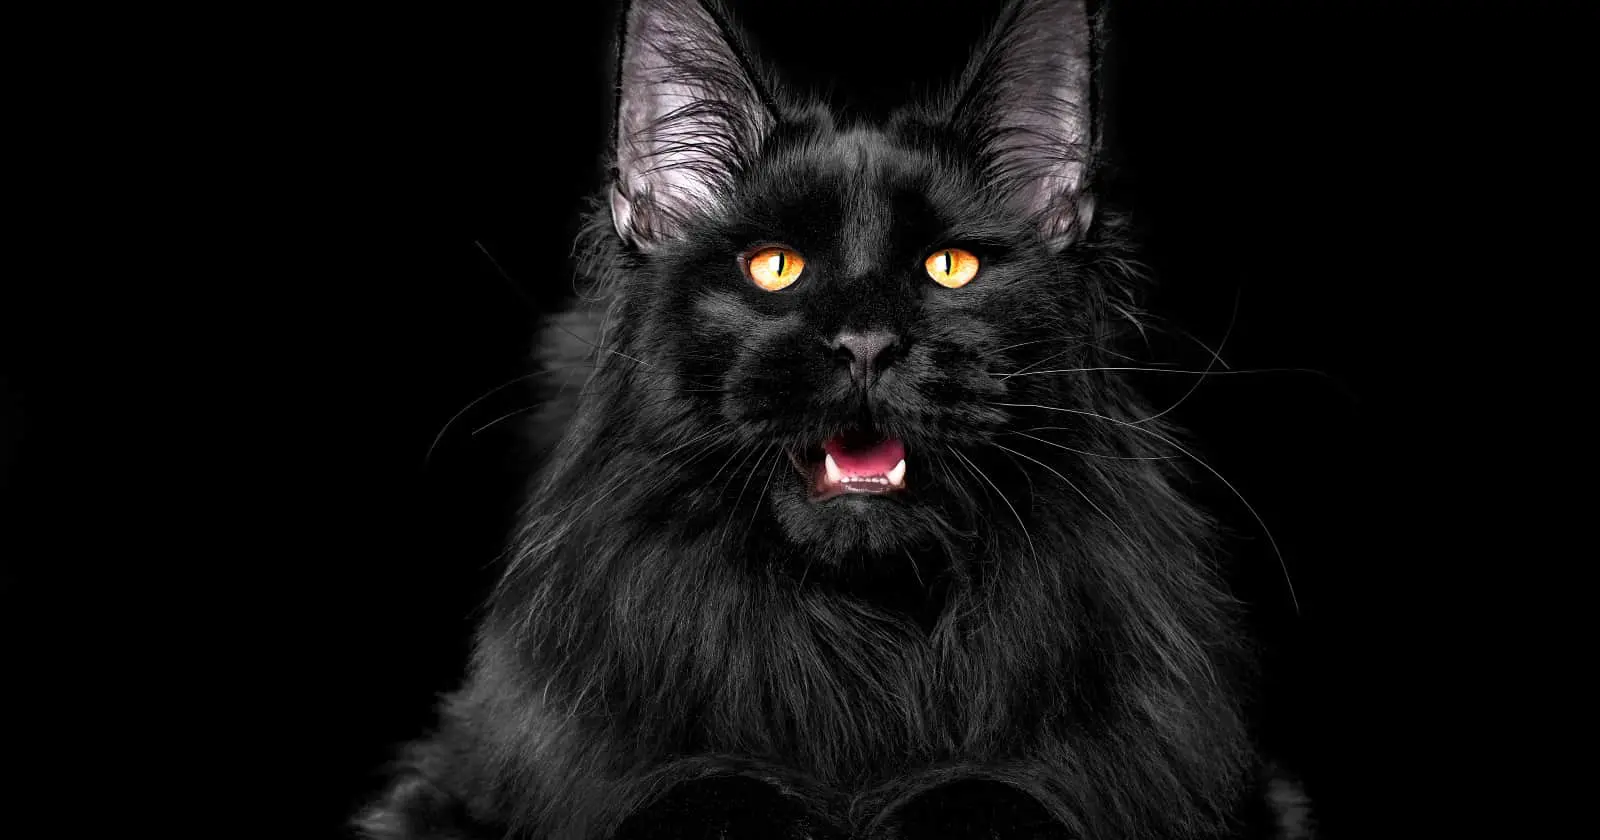 10 Black Cat Breeds You’ll Fall In Love With